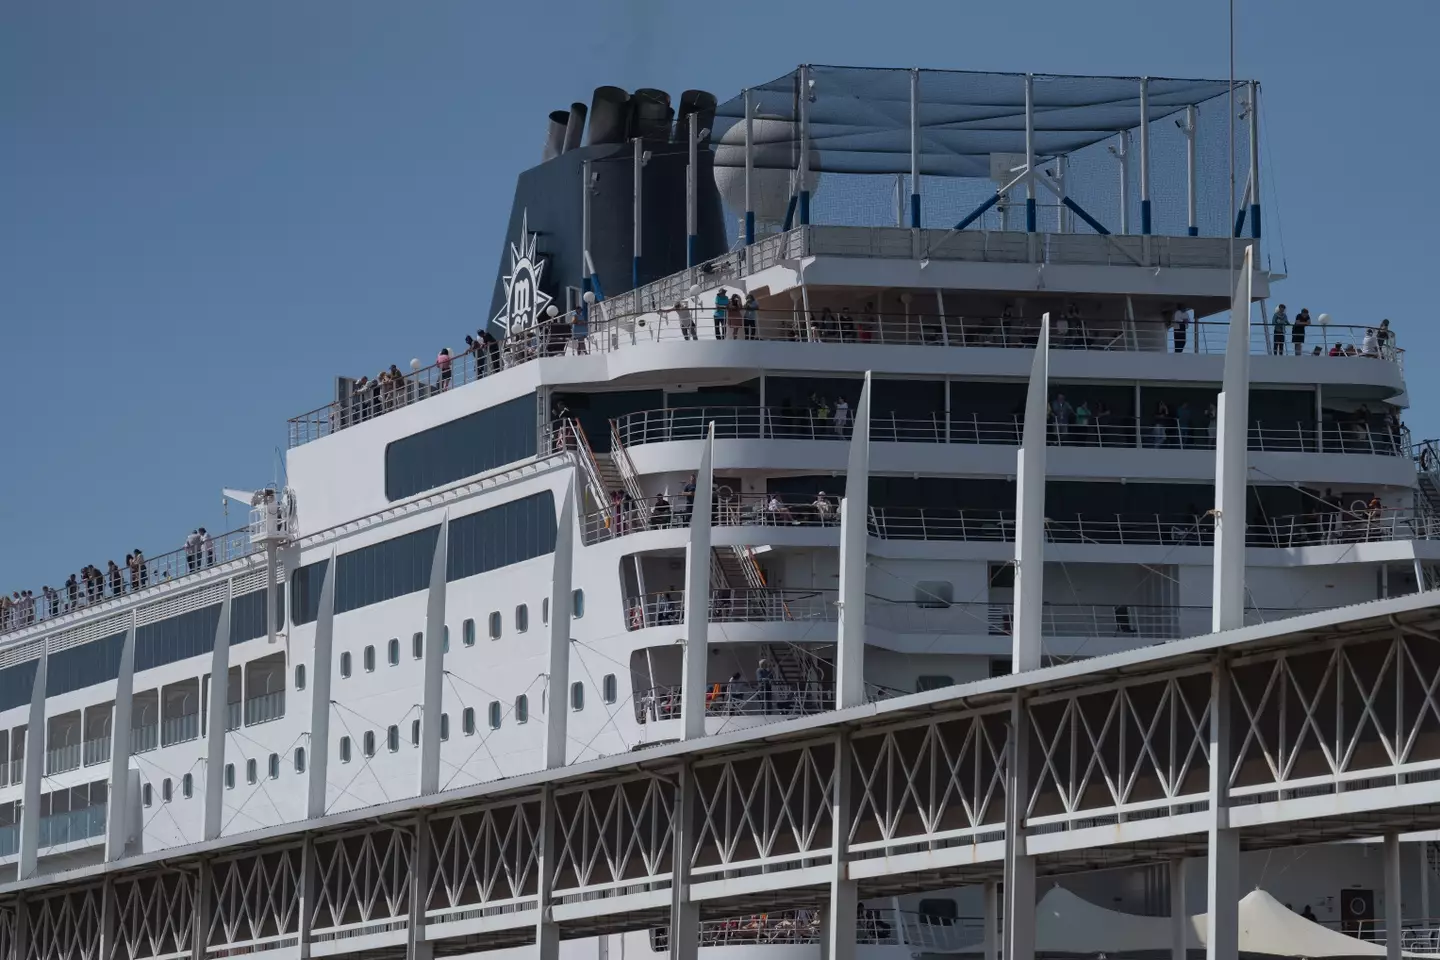 The MSC Cruises vessel found itself stuck at port in Barcelona.